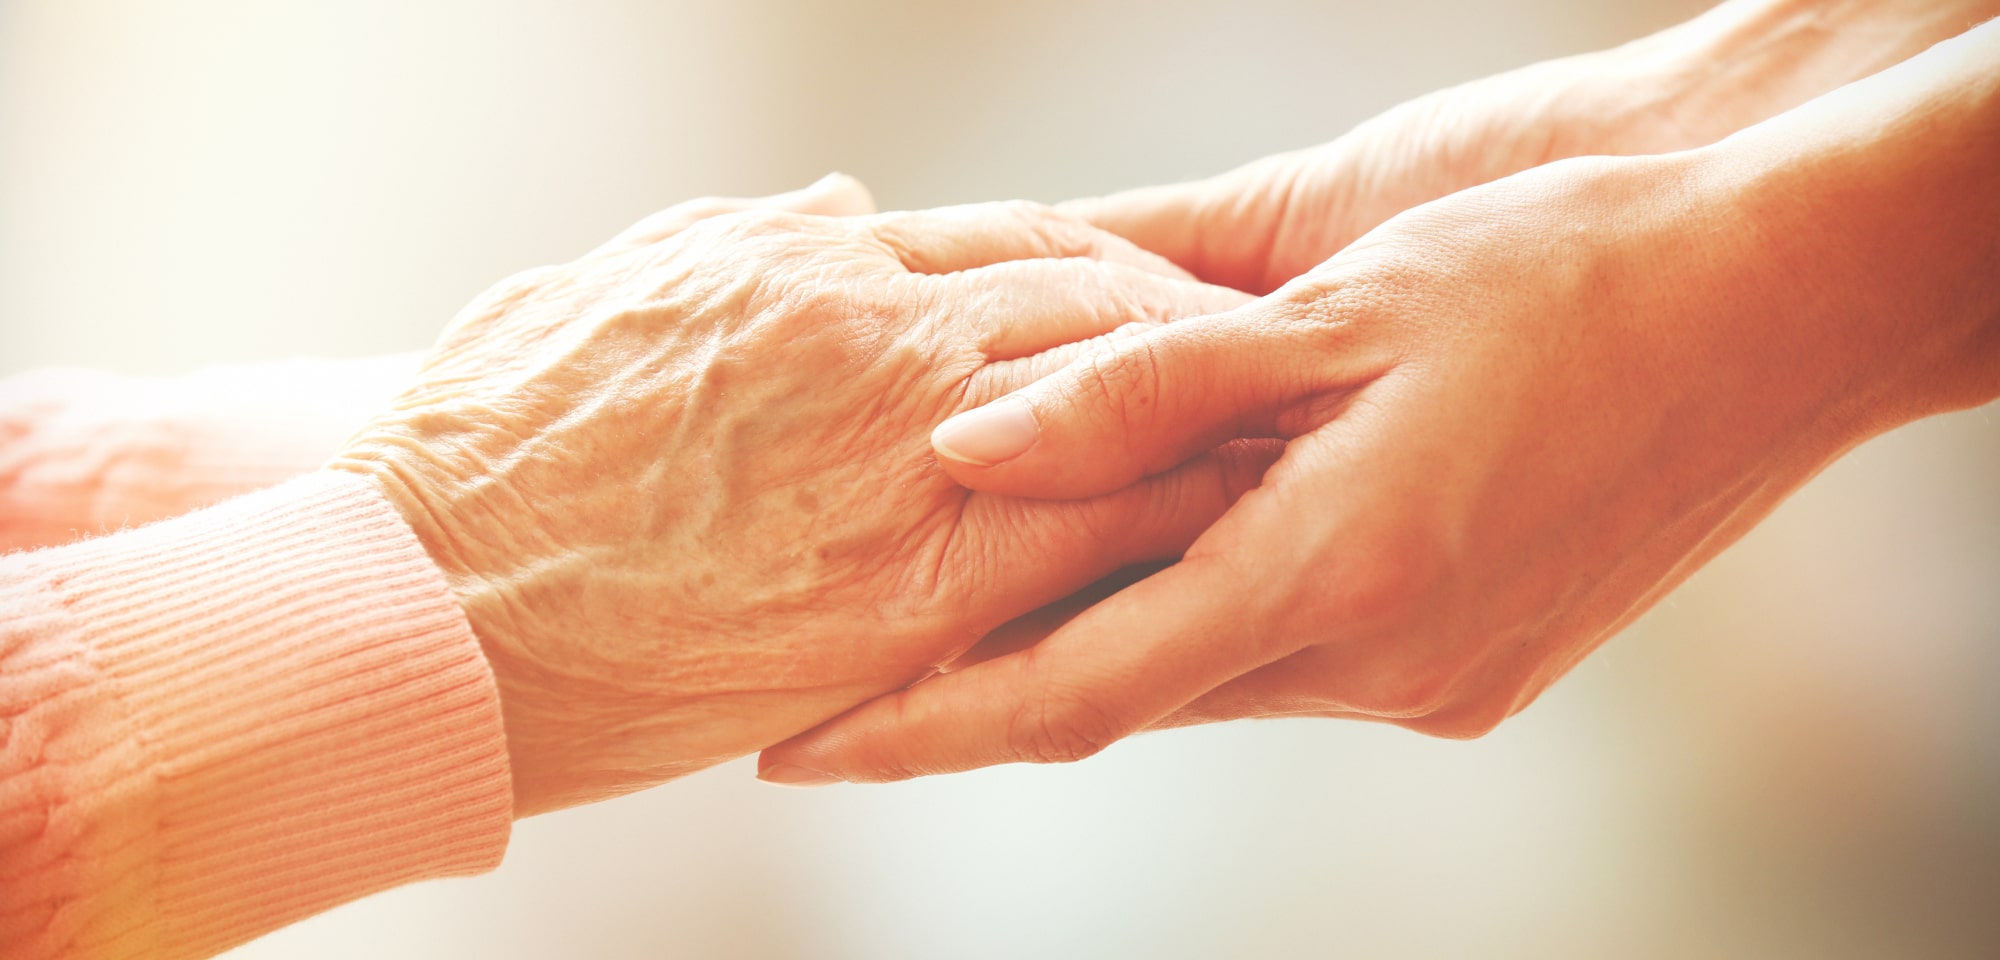 Carer and elderly person holding hands